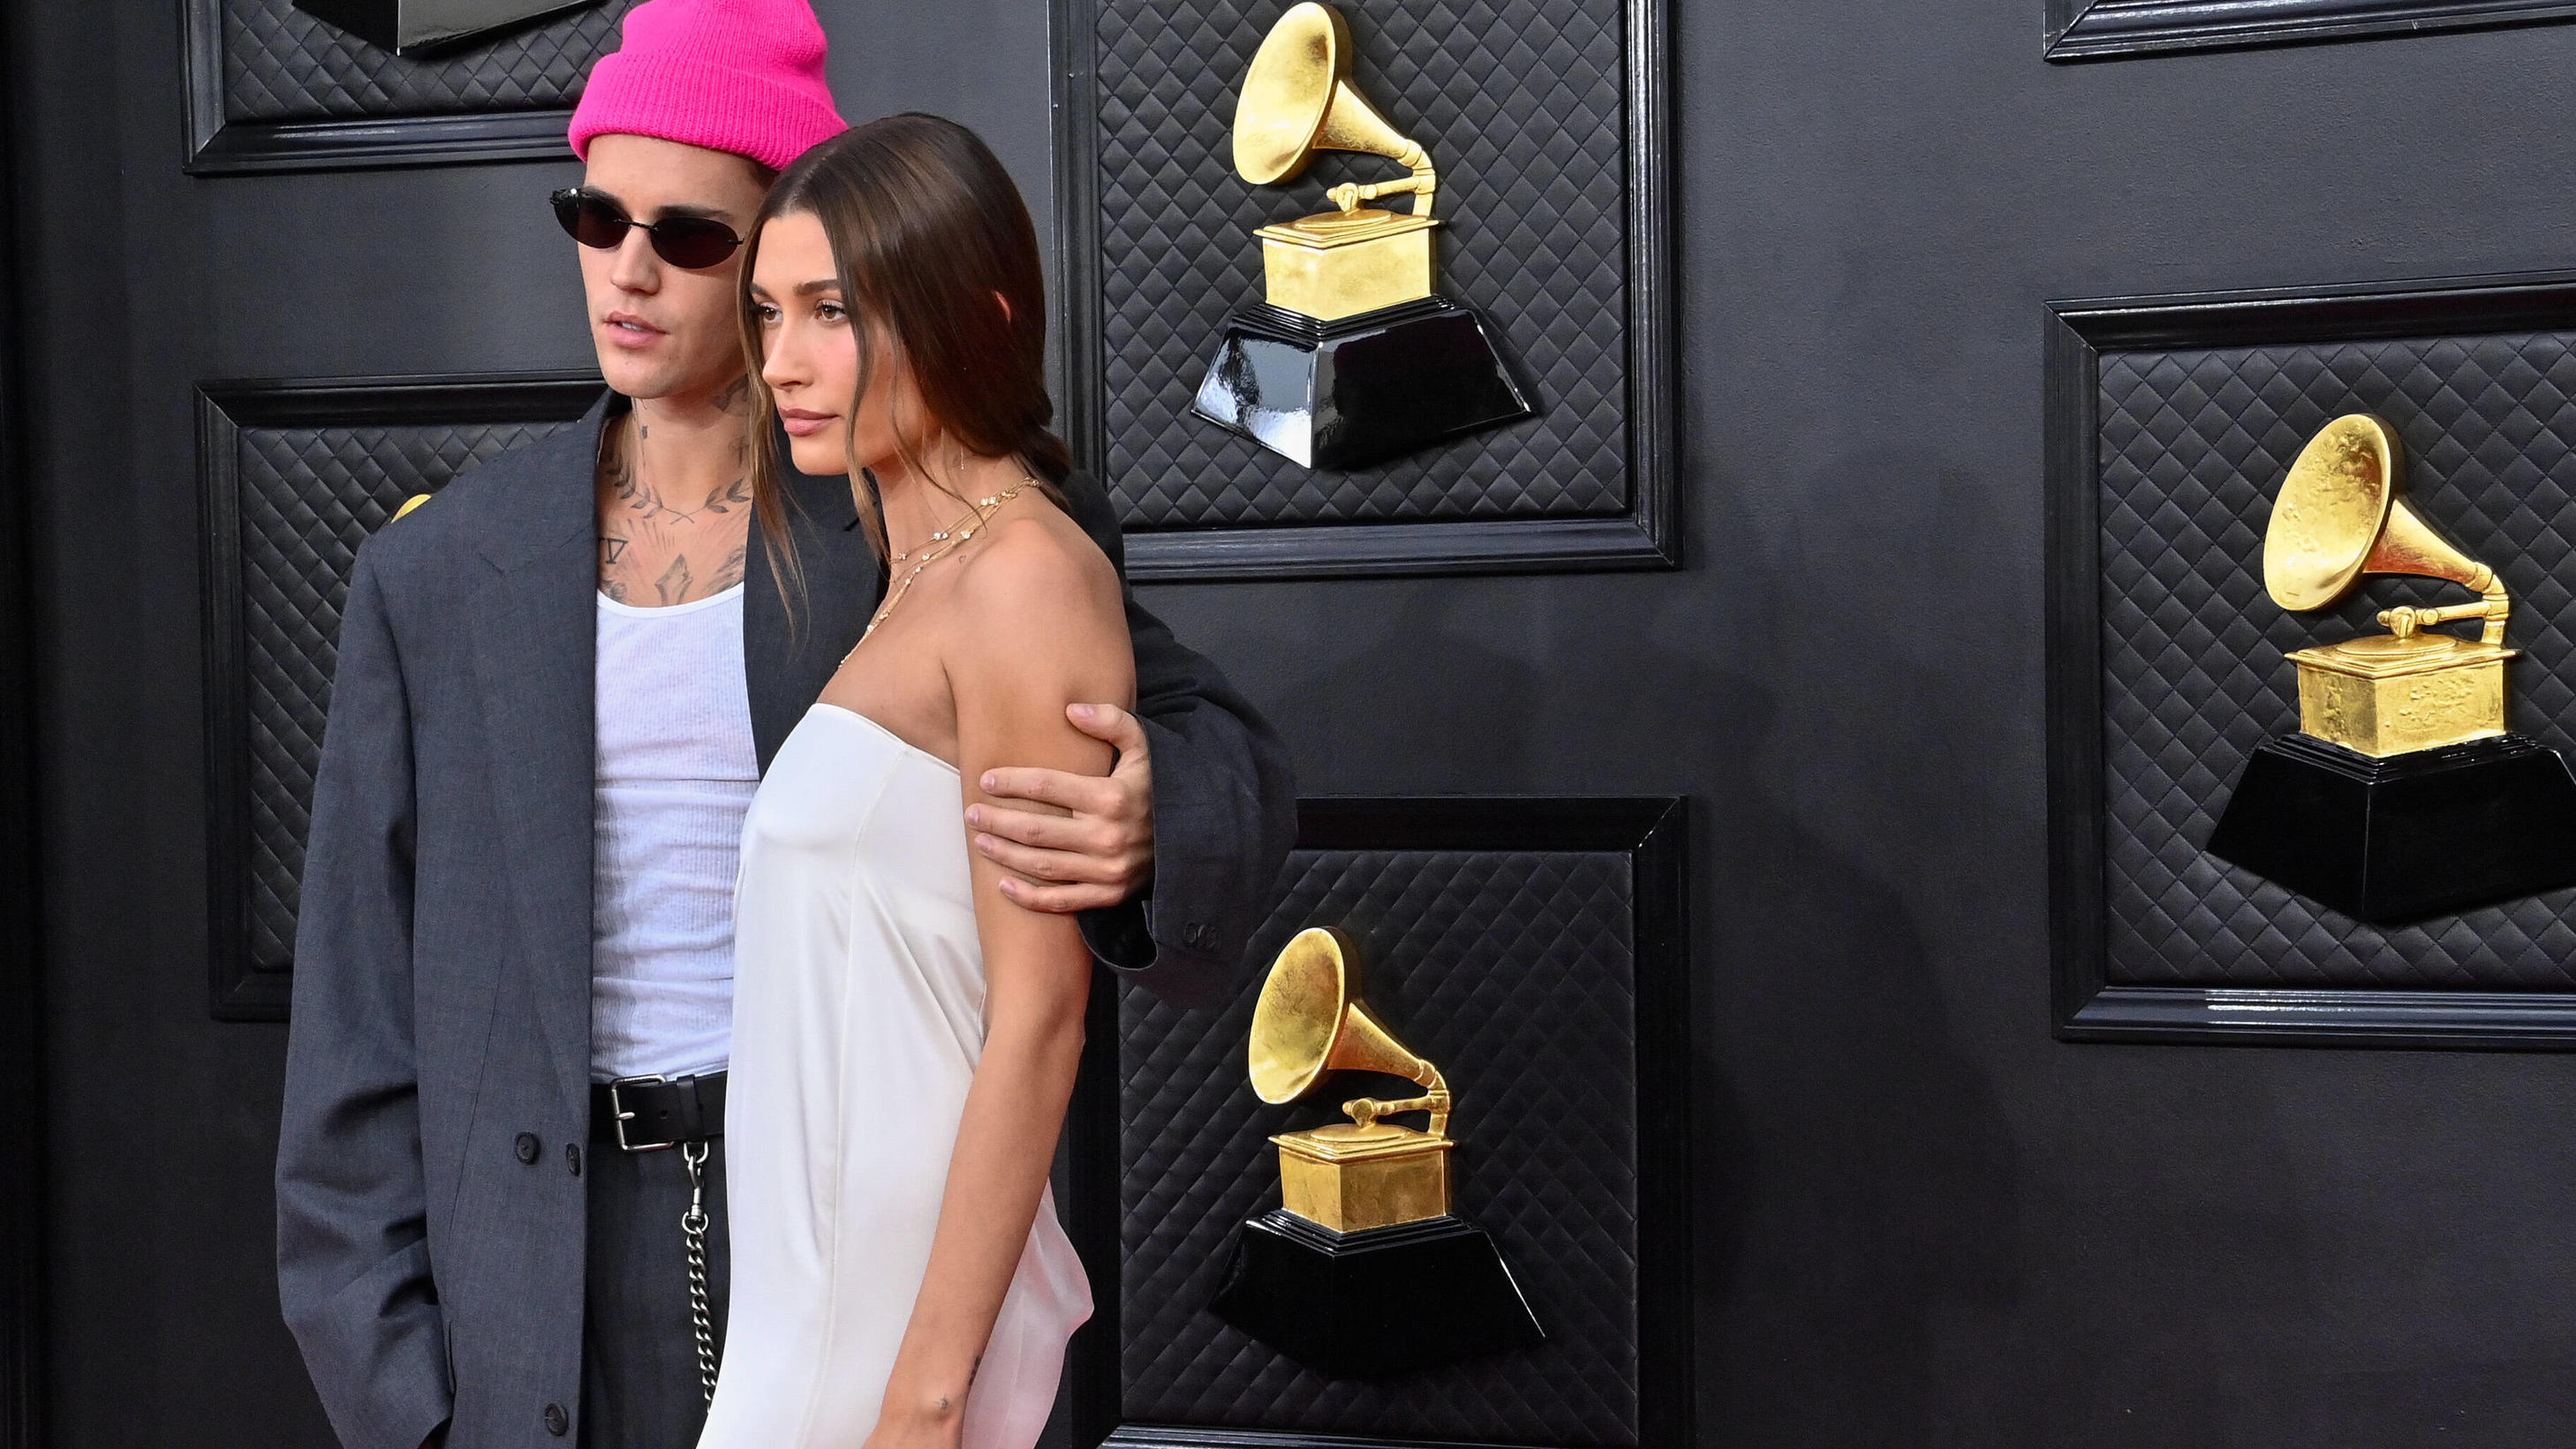  Justin Bieber and Hailey Bieber arrive for the 64th annual Grammy Awards at the MGM Grand Garden Arena in Las Vegas, Nevada on Sunday, April 3, 2022. PUBLICATIONxINxGERxSUIxAUTxHUNxONLY LAV202204031020 JIMxRUYMEN